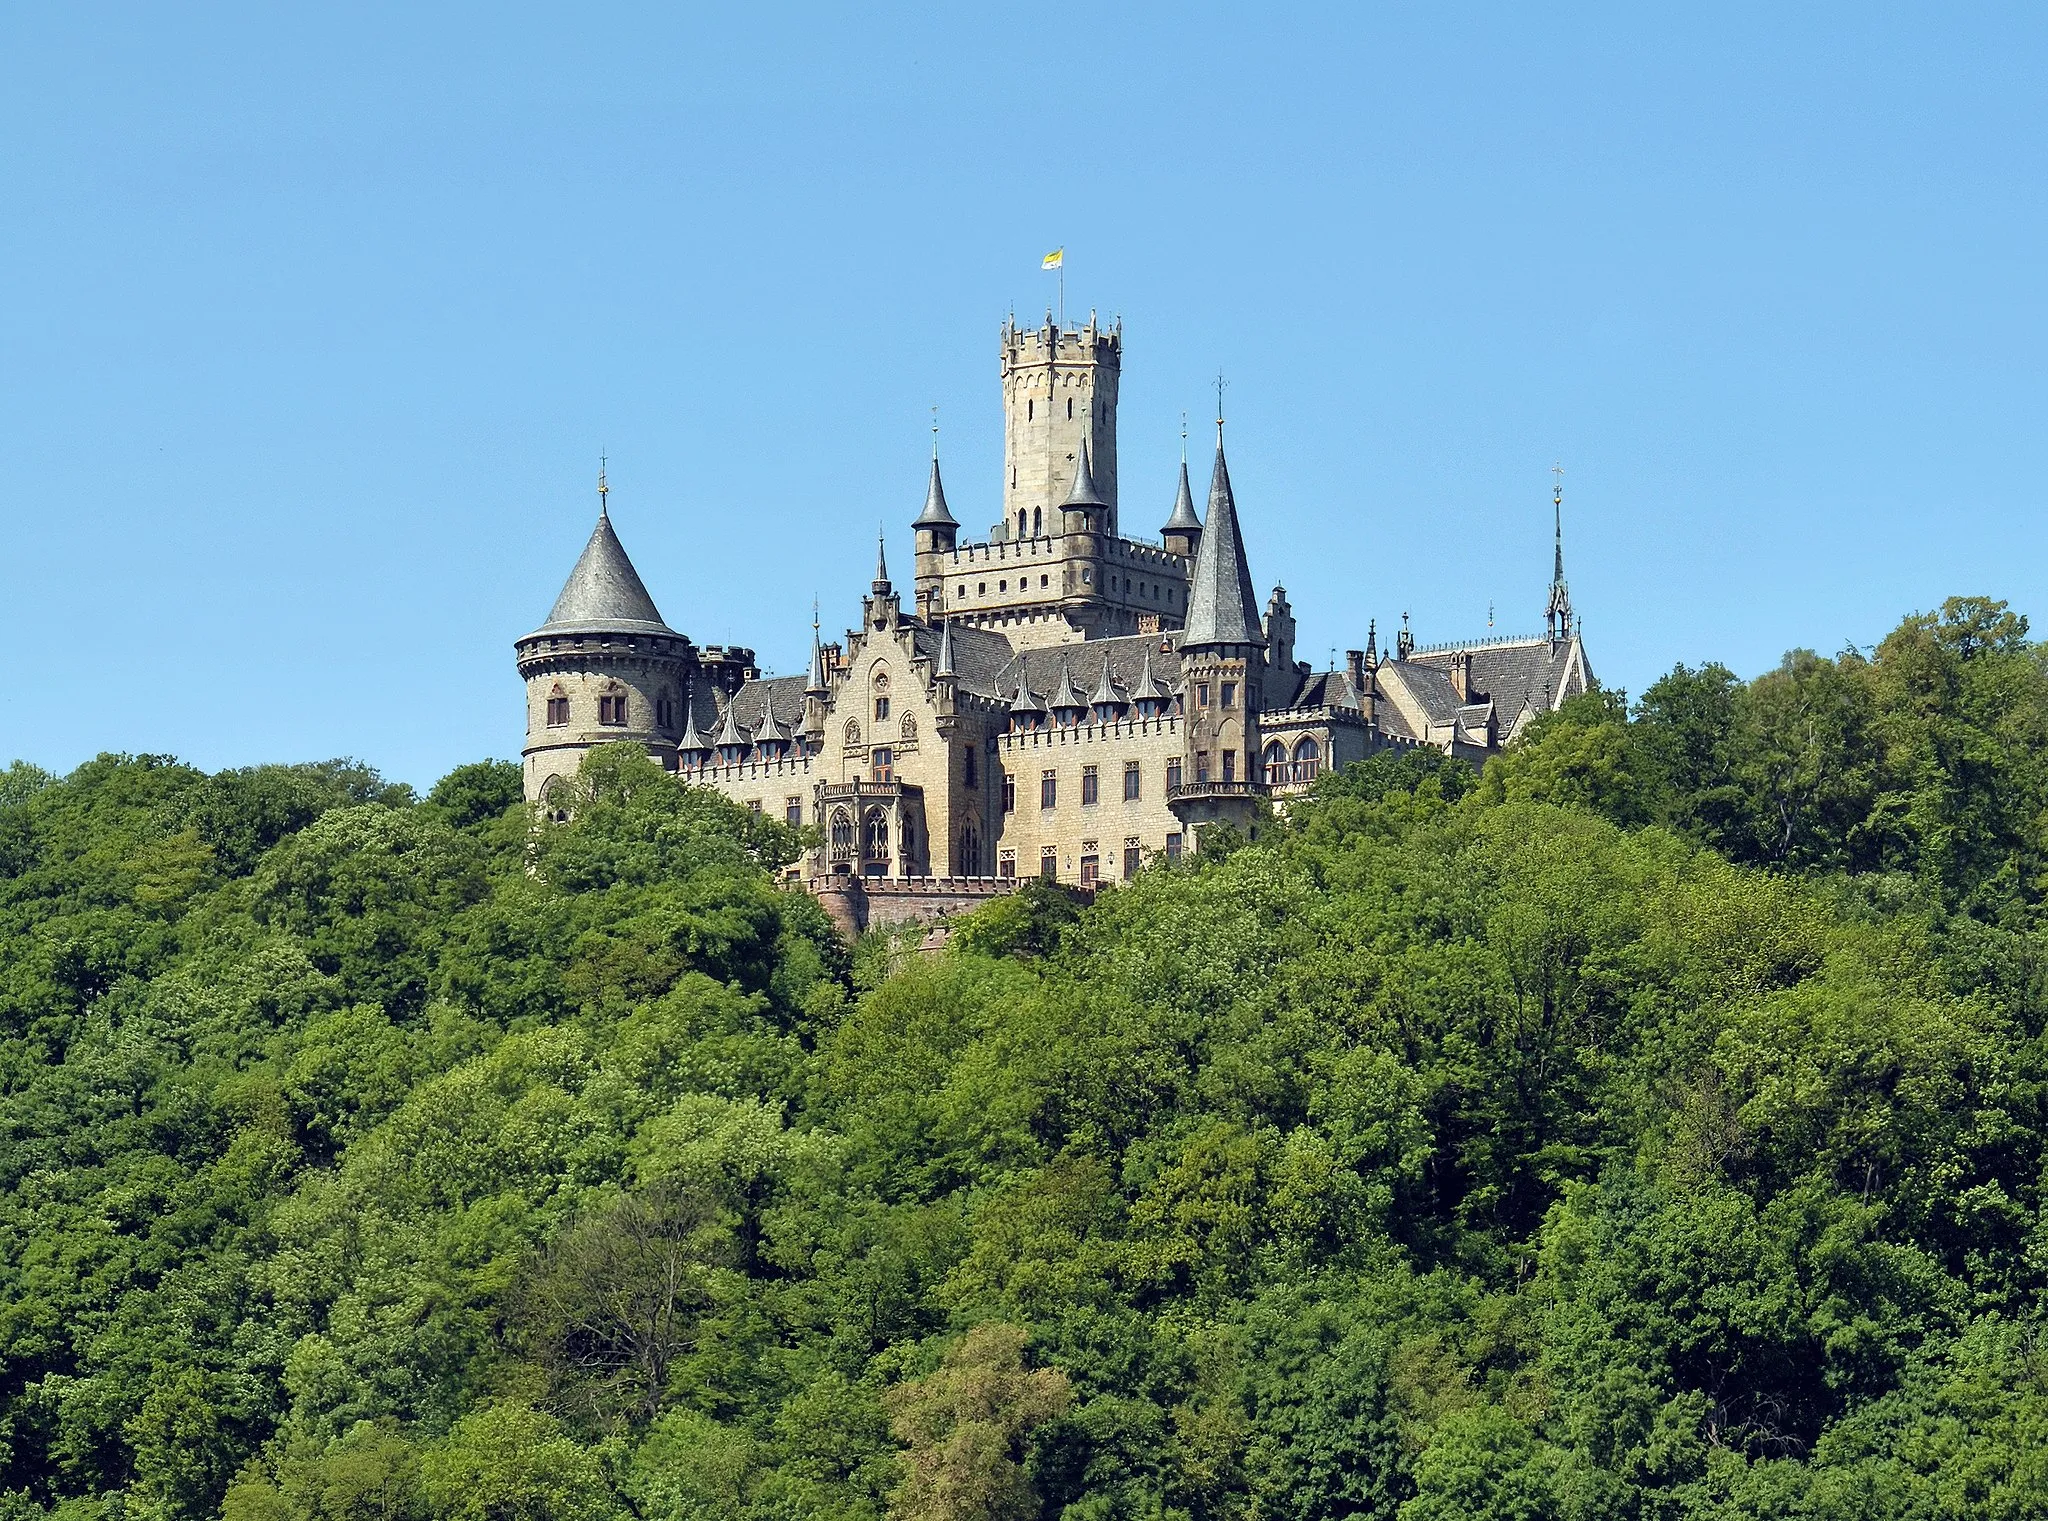 Photo showing: Marienburg Castle is a Gothic revival castle in Hanover, Lower Saxony, Germany, built by Marie of Saxe-Altenburg, Queen of Hanover. The castle mustn't be confused with the Marienburg near Hildesheim.